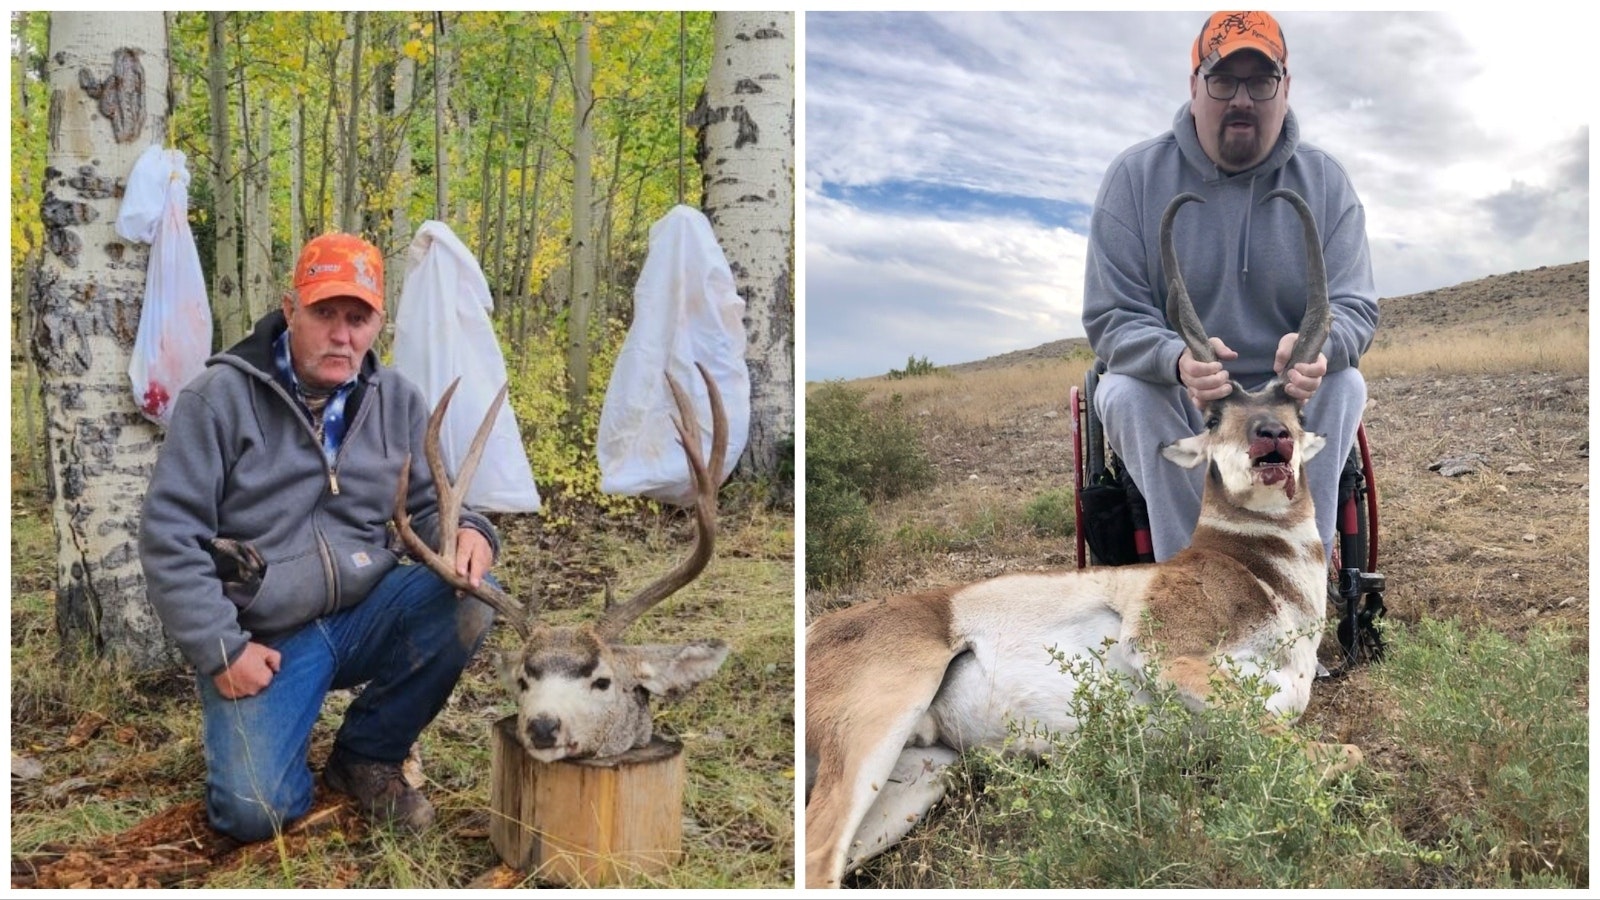 Richard Gunyan of Rock Springs, left, shot this huge mule deer buck last year. This year he turned deer tag in for the Let a Deer Walk program, and will have a taxidermist mount last year’s buck. Terri Elliott of Riverton, right, poses with a large antelope buck he bagged last year. He selected a commissioner’s hunting tag from the prize drawing and donated it.